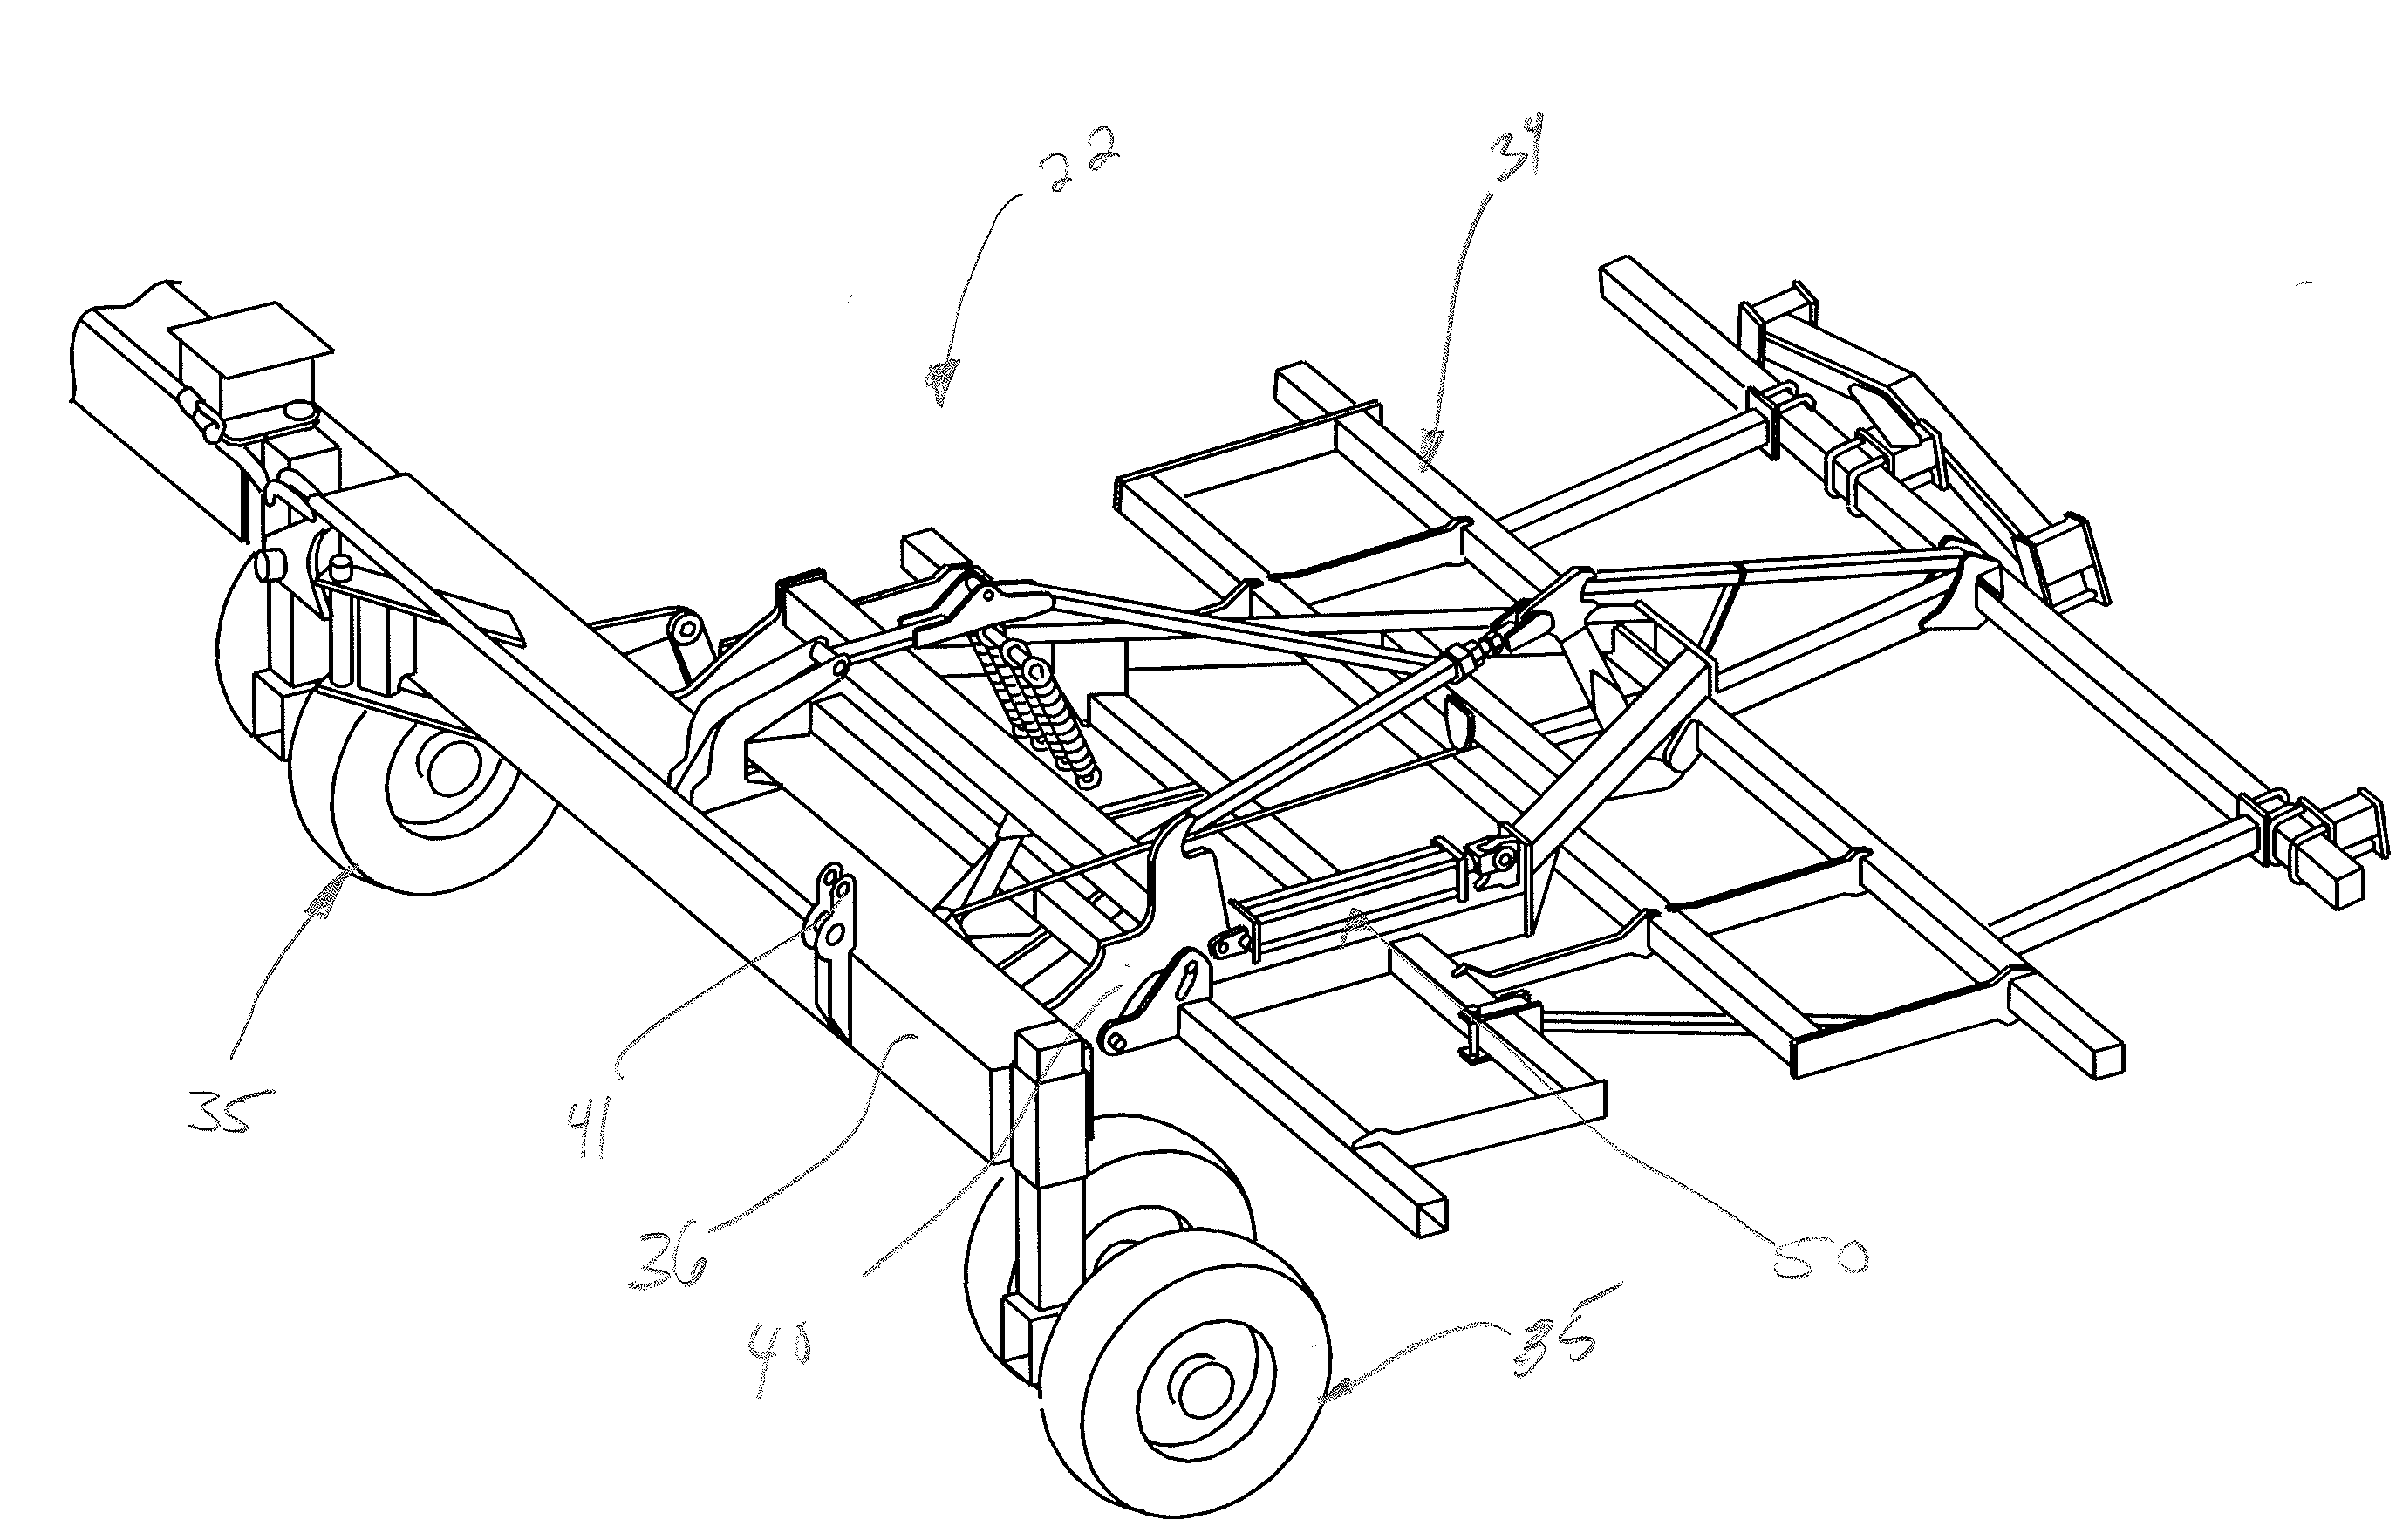 Hydraulic control system having an upper depth stop valve with bypass